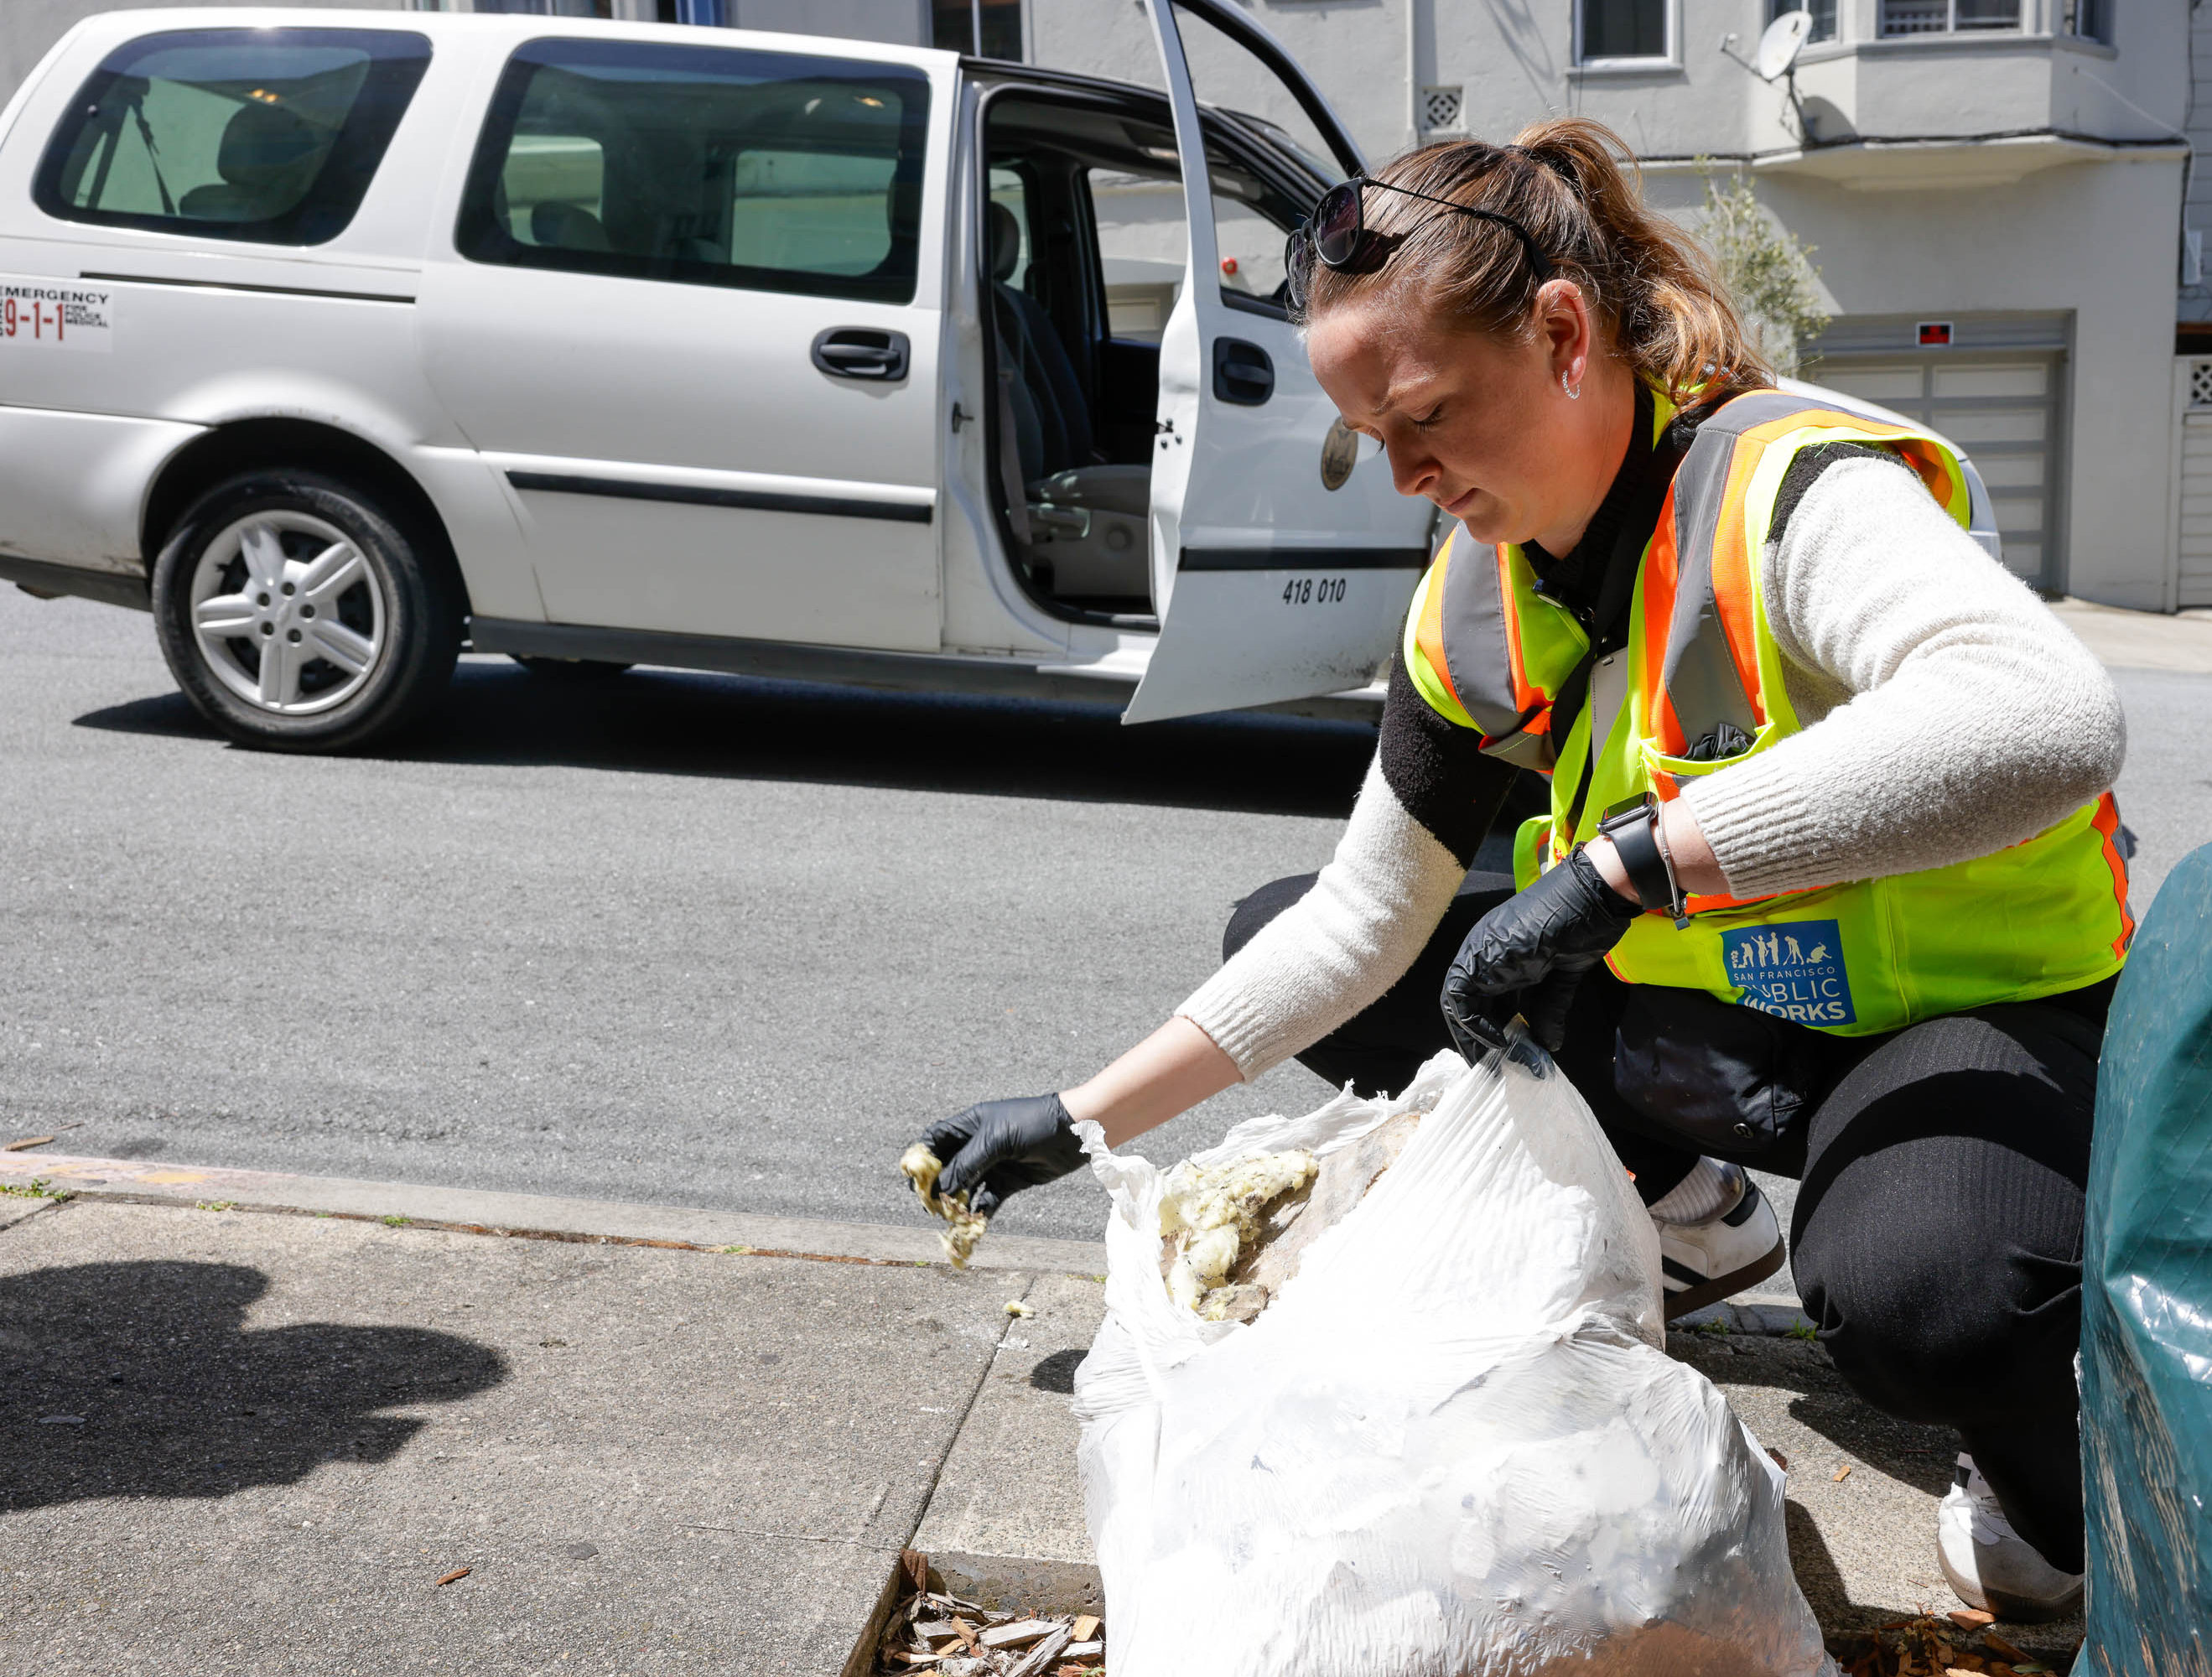 A woman in a safety vest cleans street debris near a parked van.